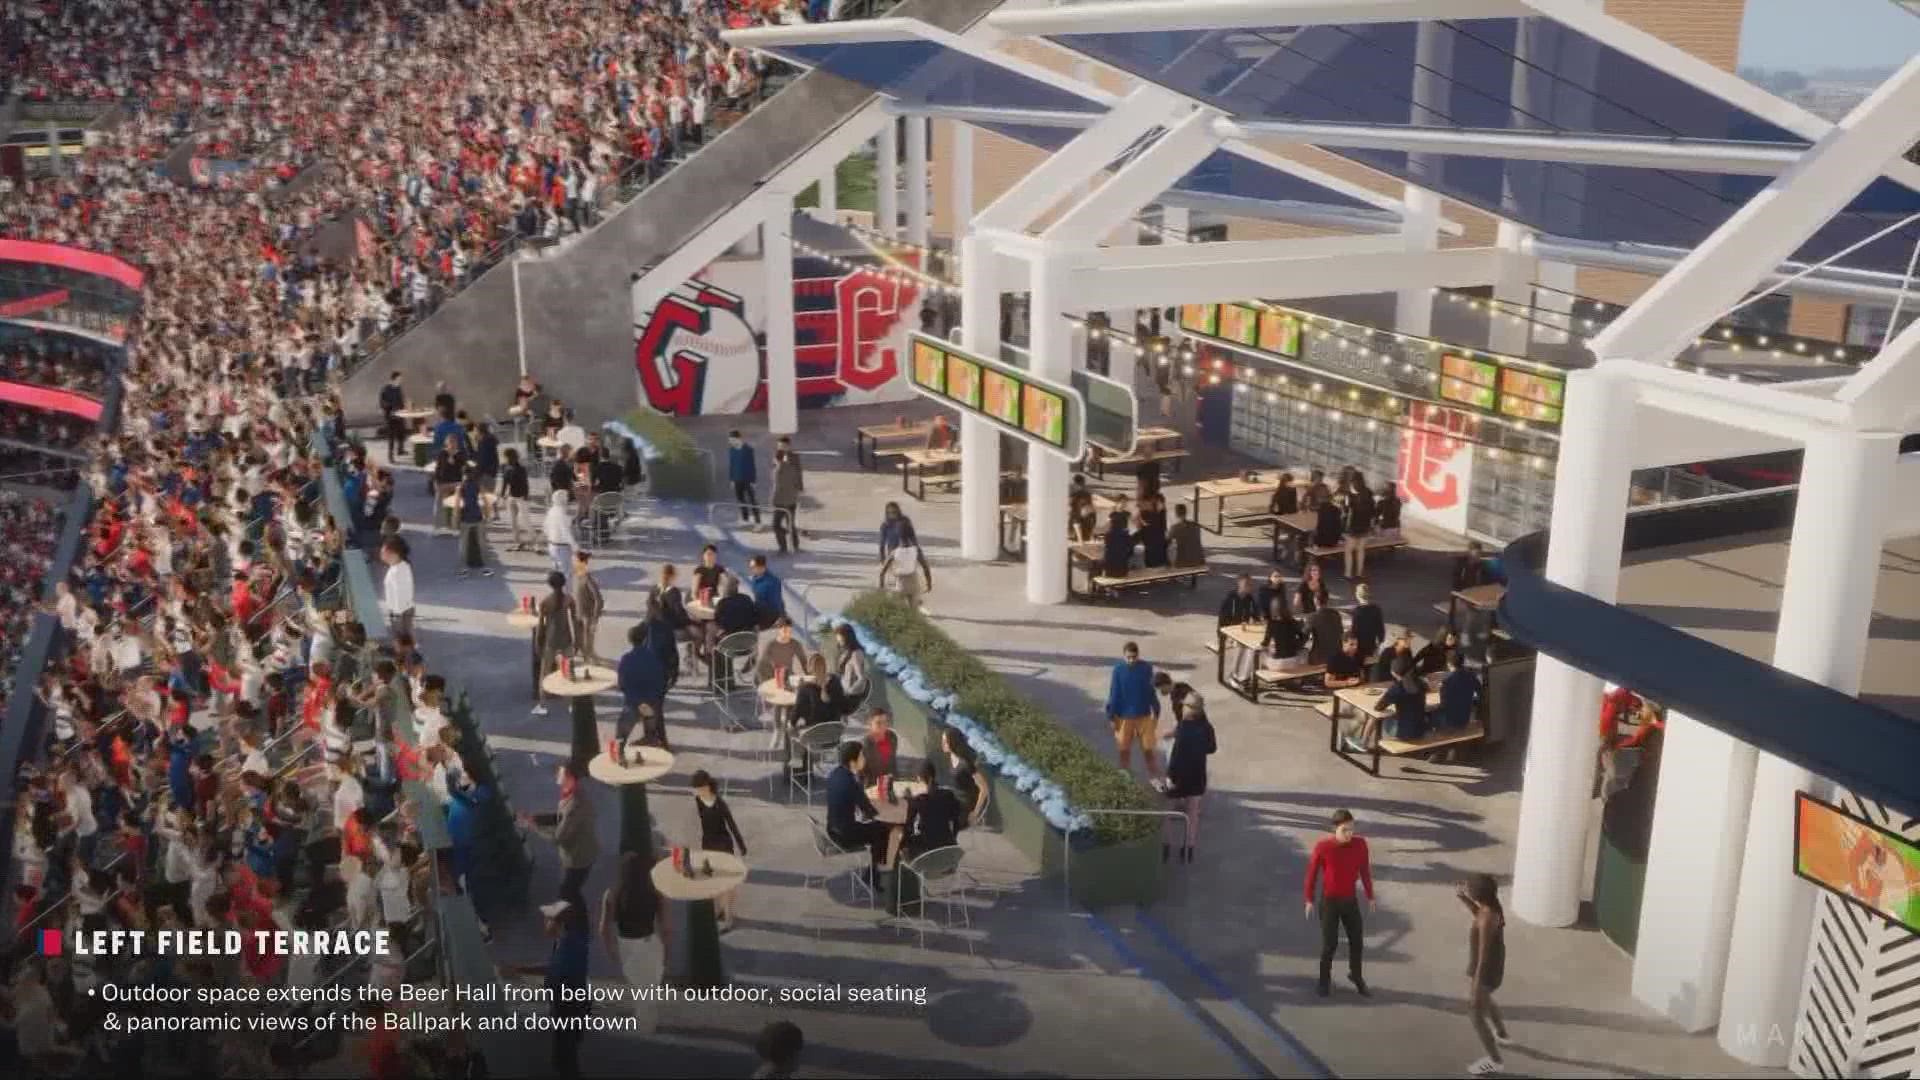 Officials from the Guardians have released the final project plans for 'Progressive Field Reimagined.'